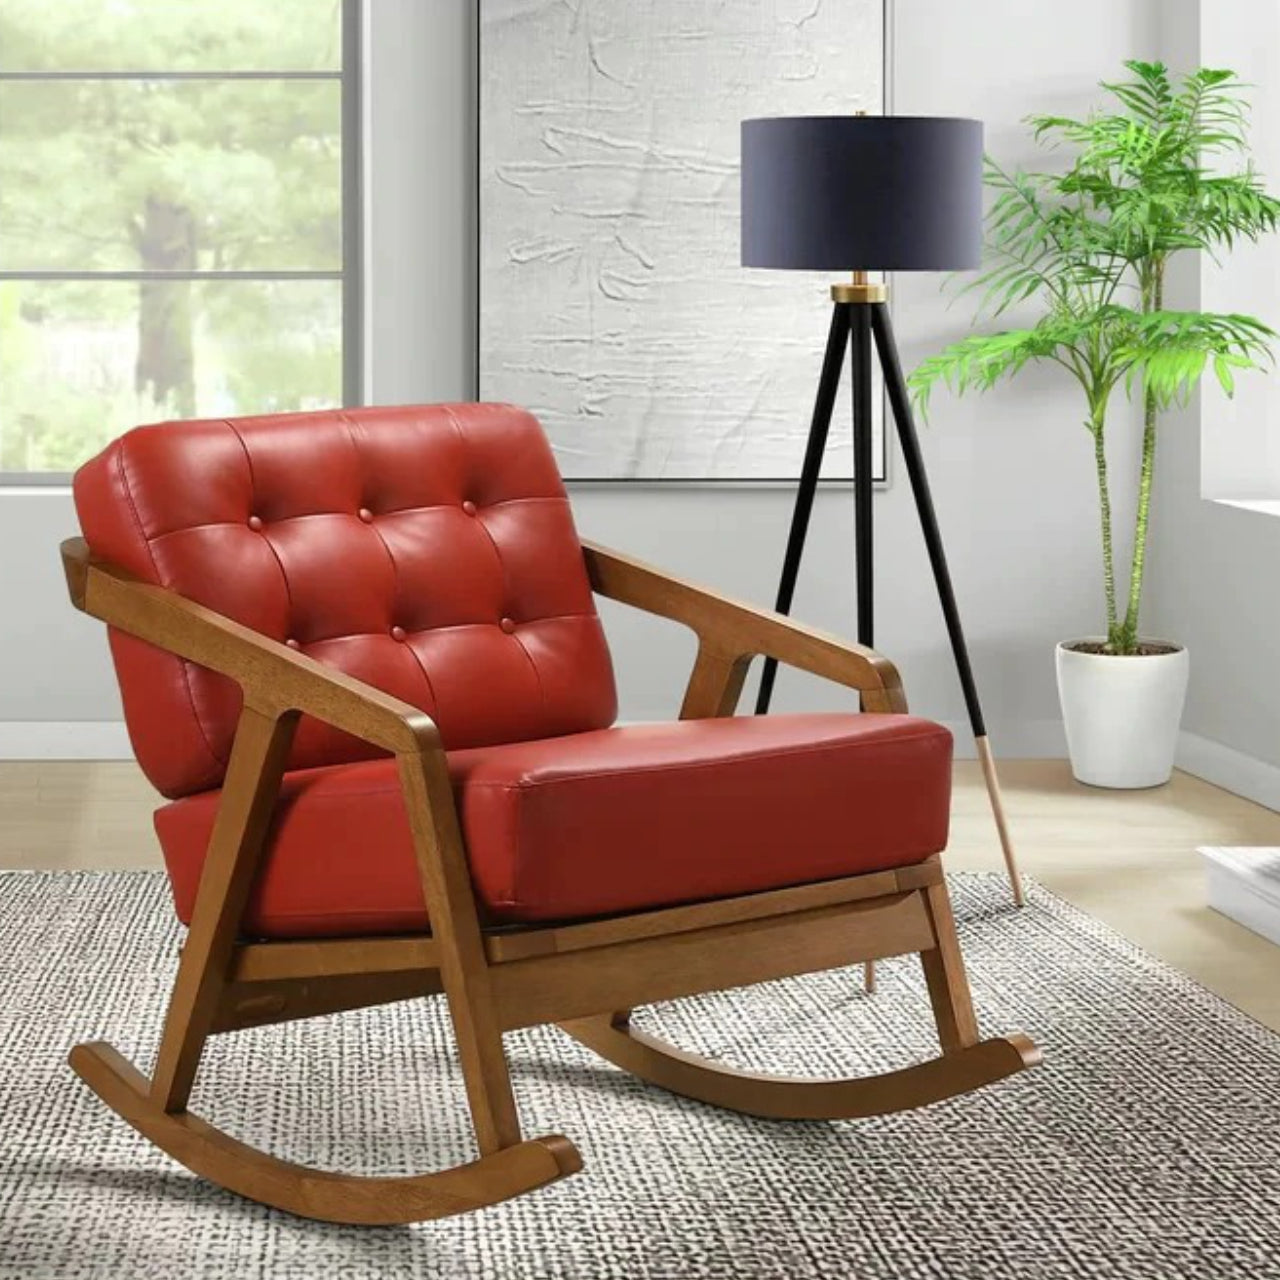 Rocking Chair Tufted Buttoned Rocking Chair